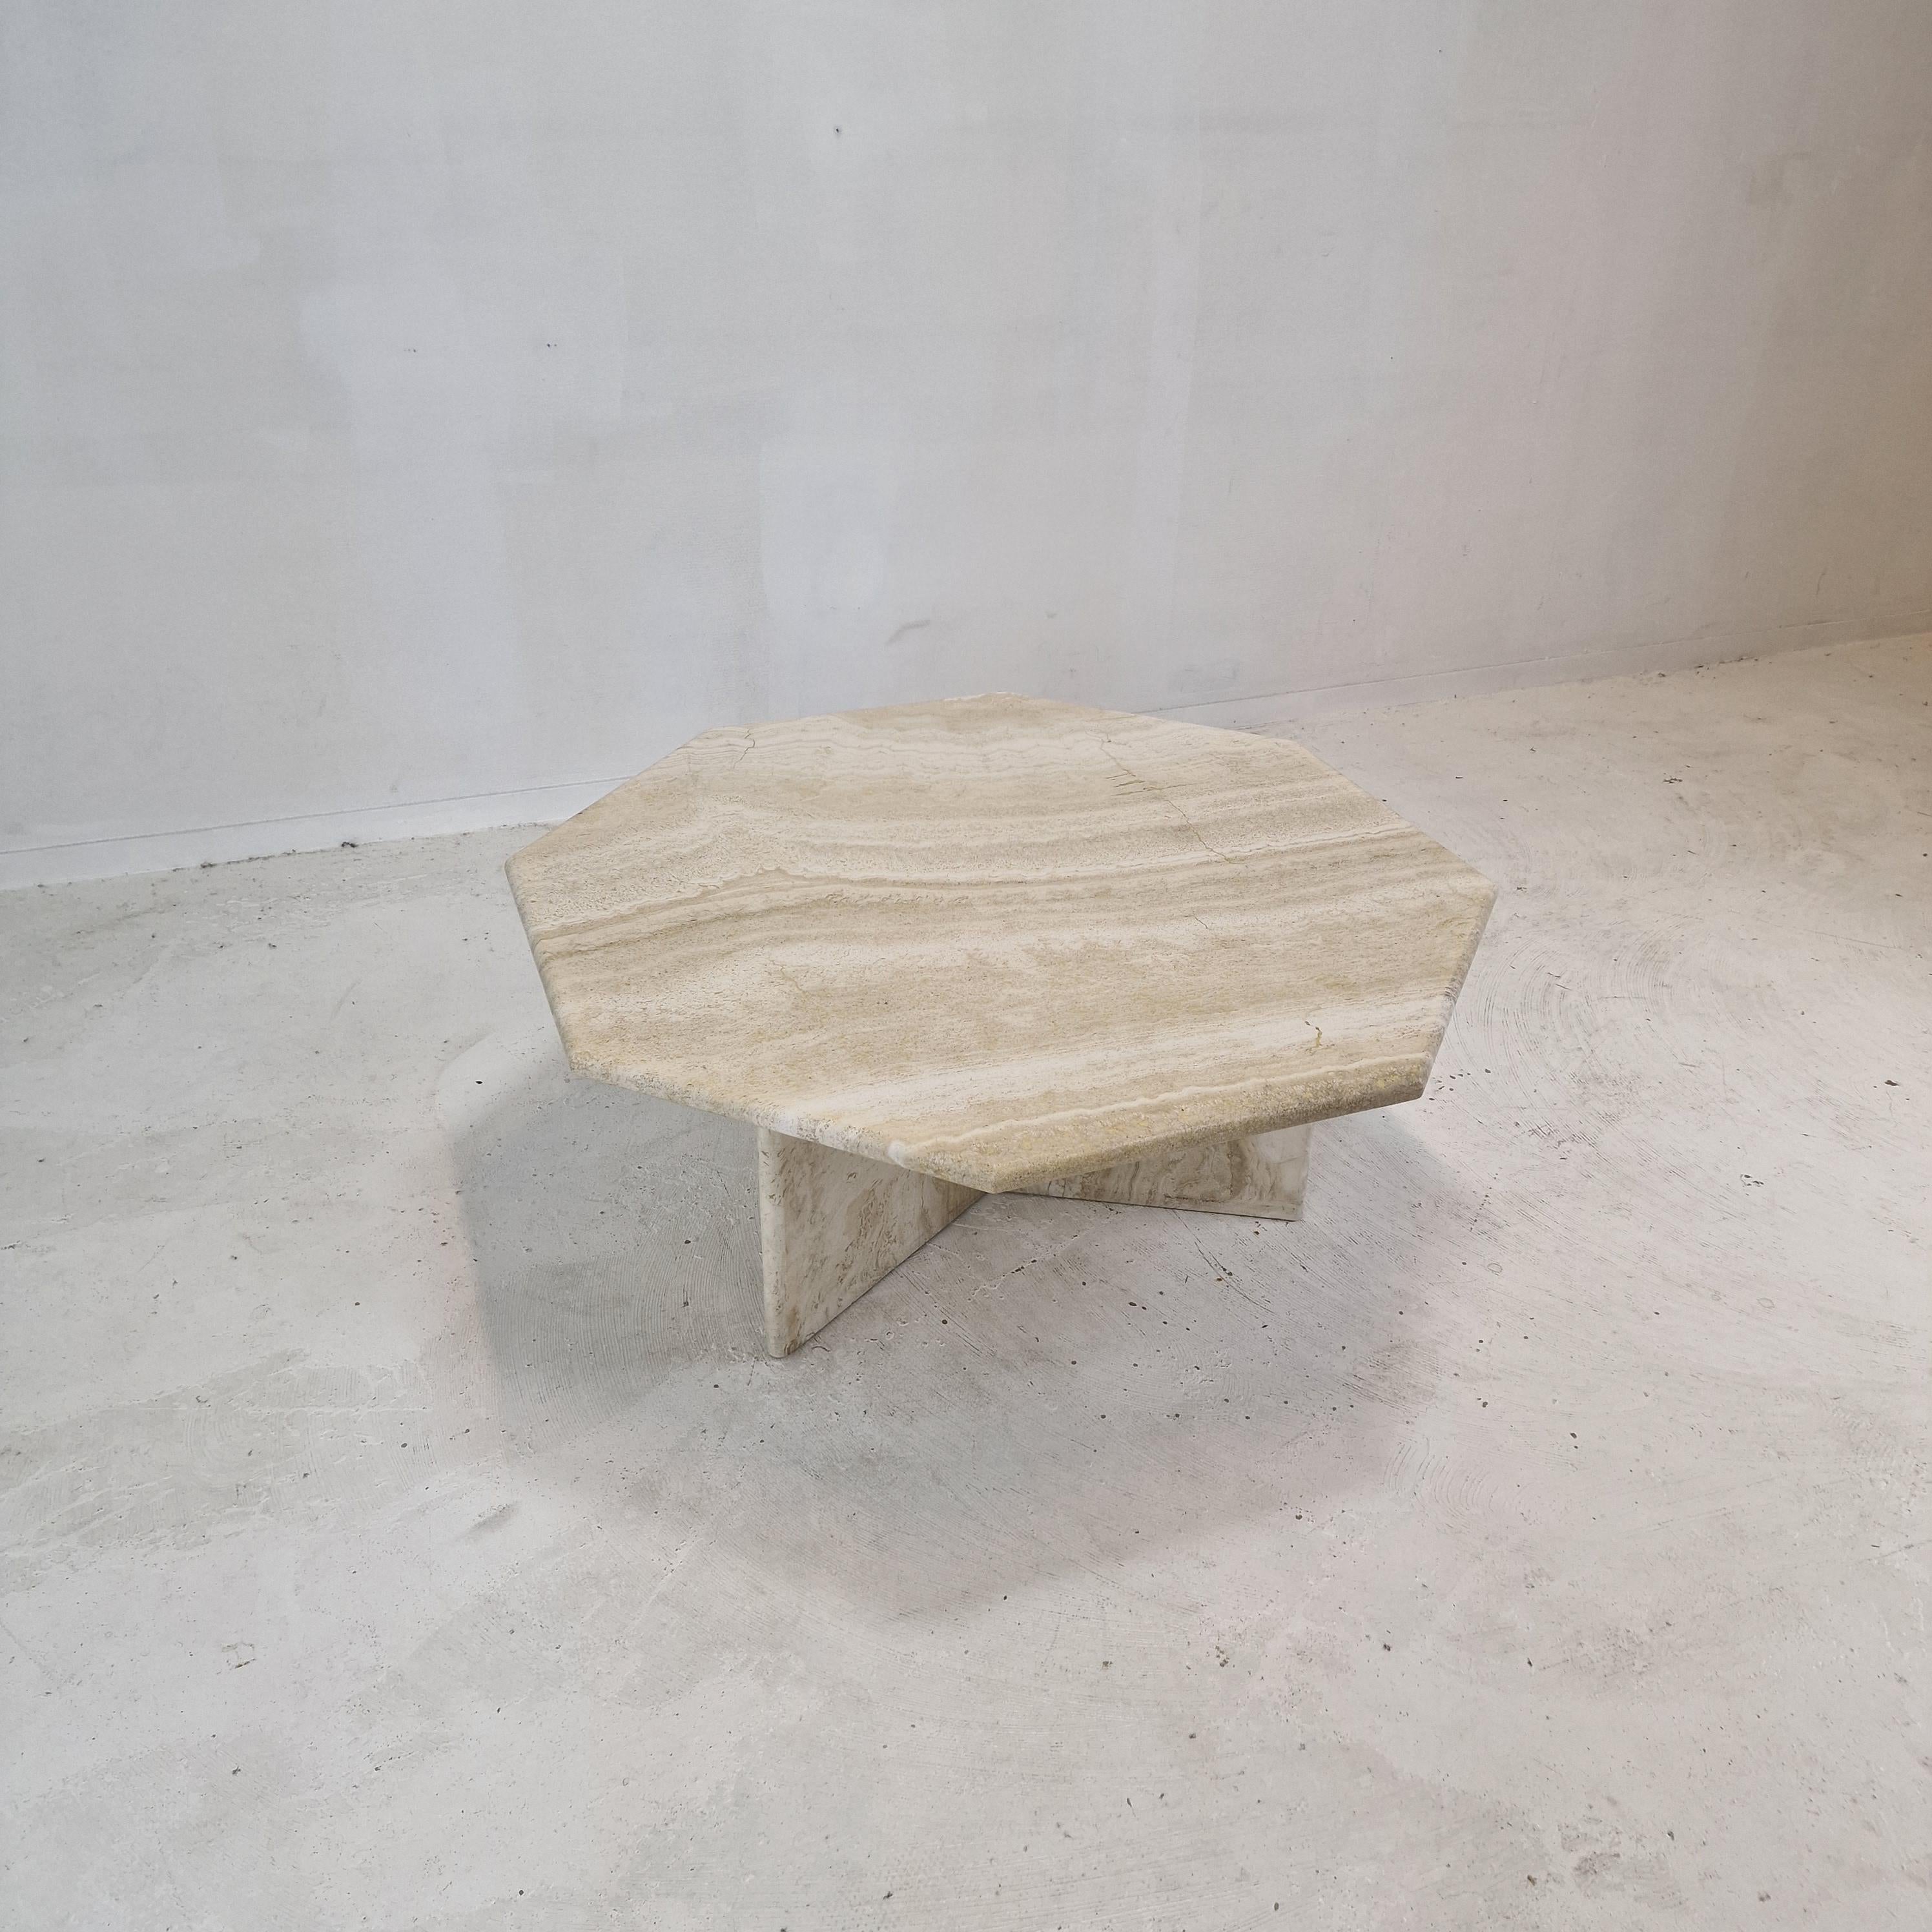 Italian Octagon Coffee Table in Travertine, 1980s For Sale 3